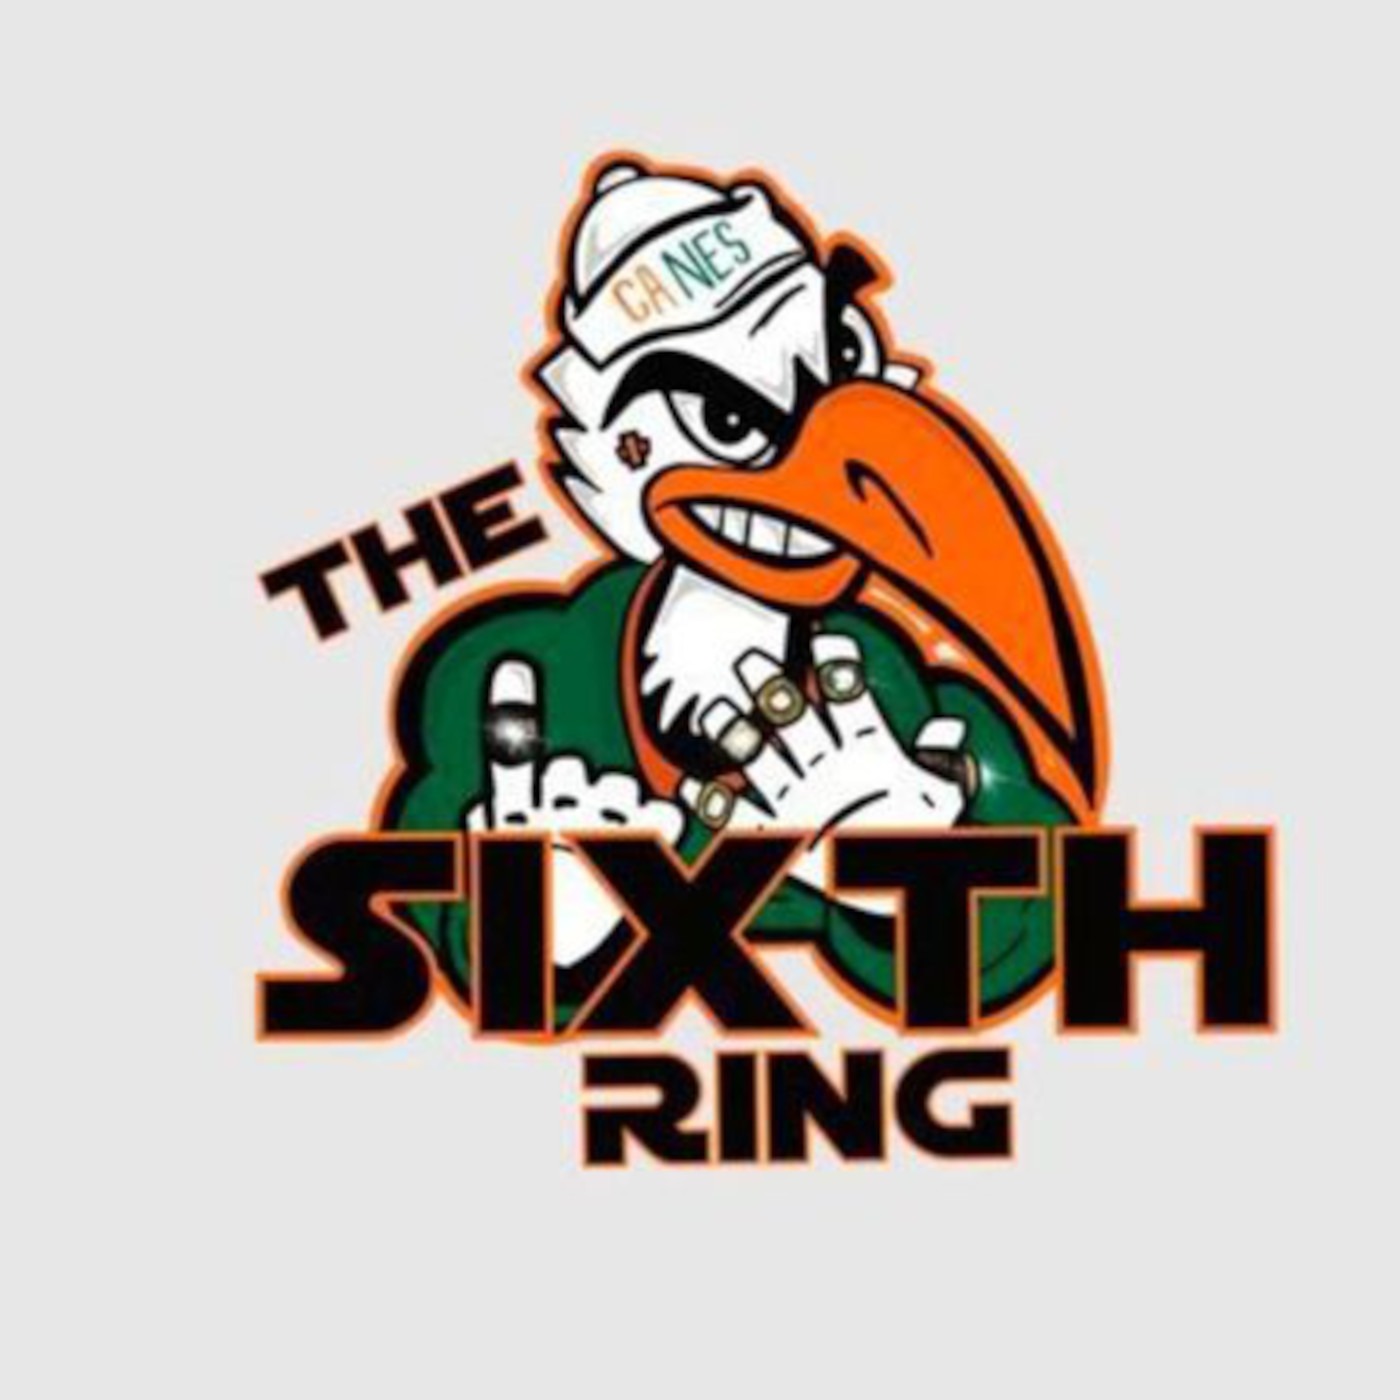 High School Camp and Recruiting Update | Sixth Ring Canes